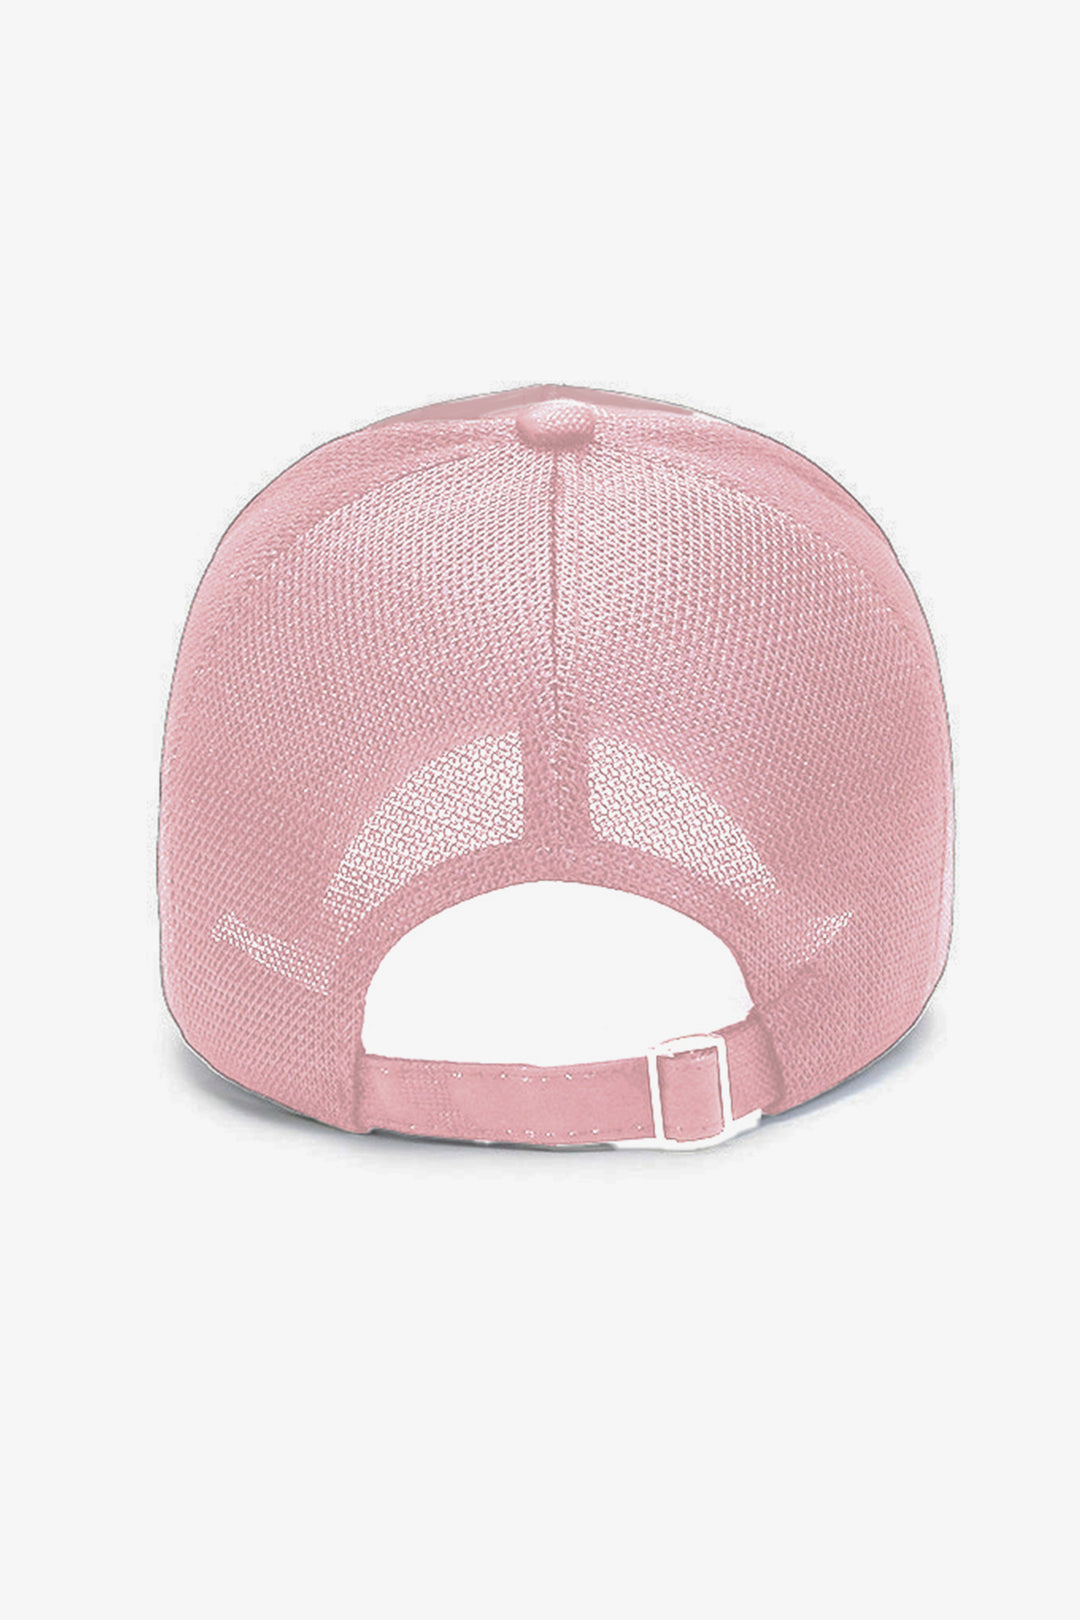 Pink Embroidered Online Caps in Pakistan